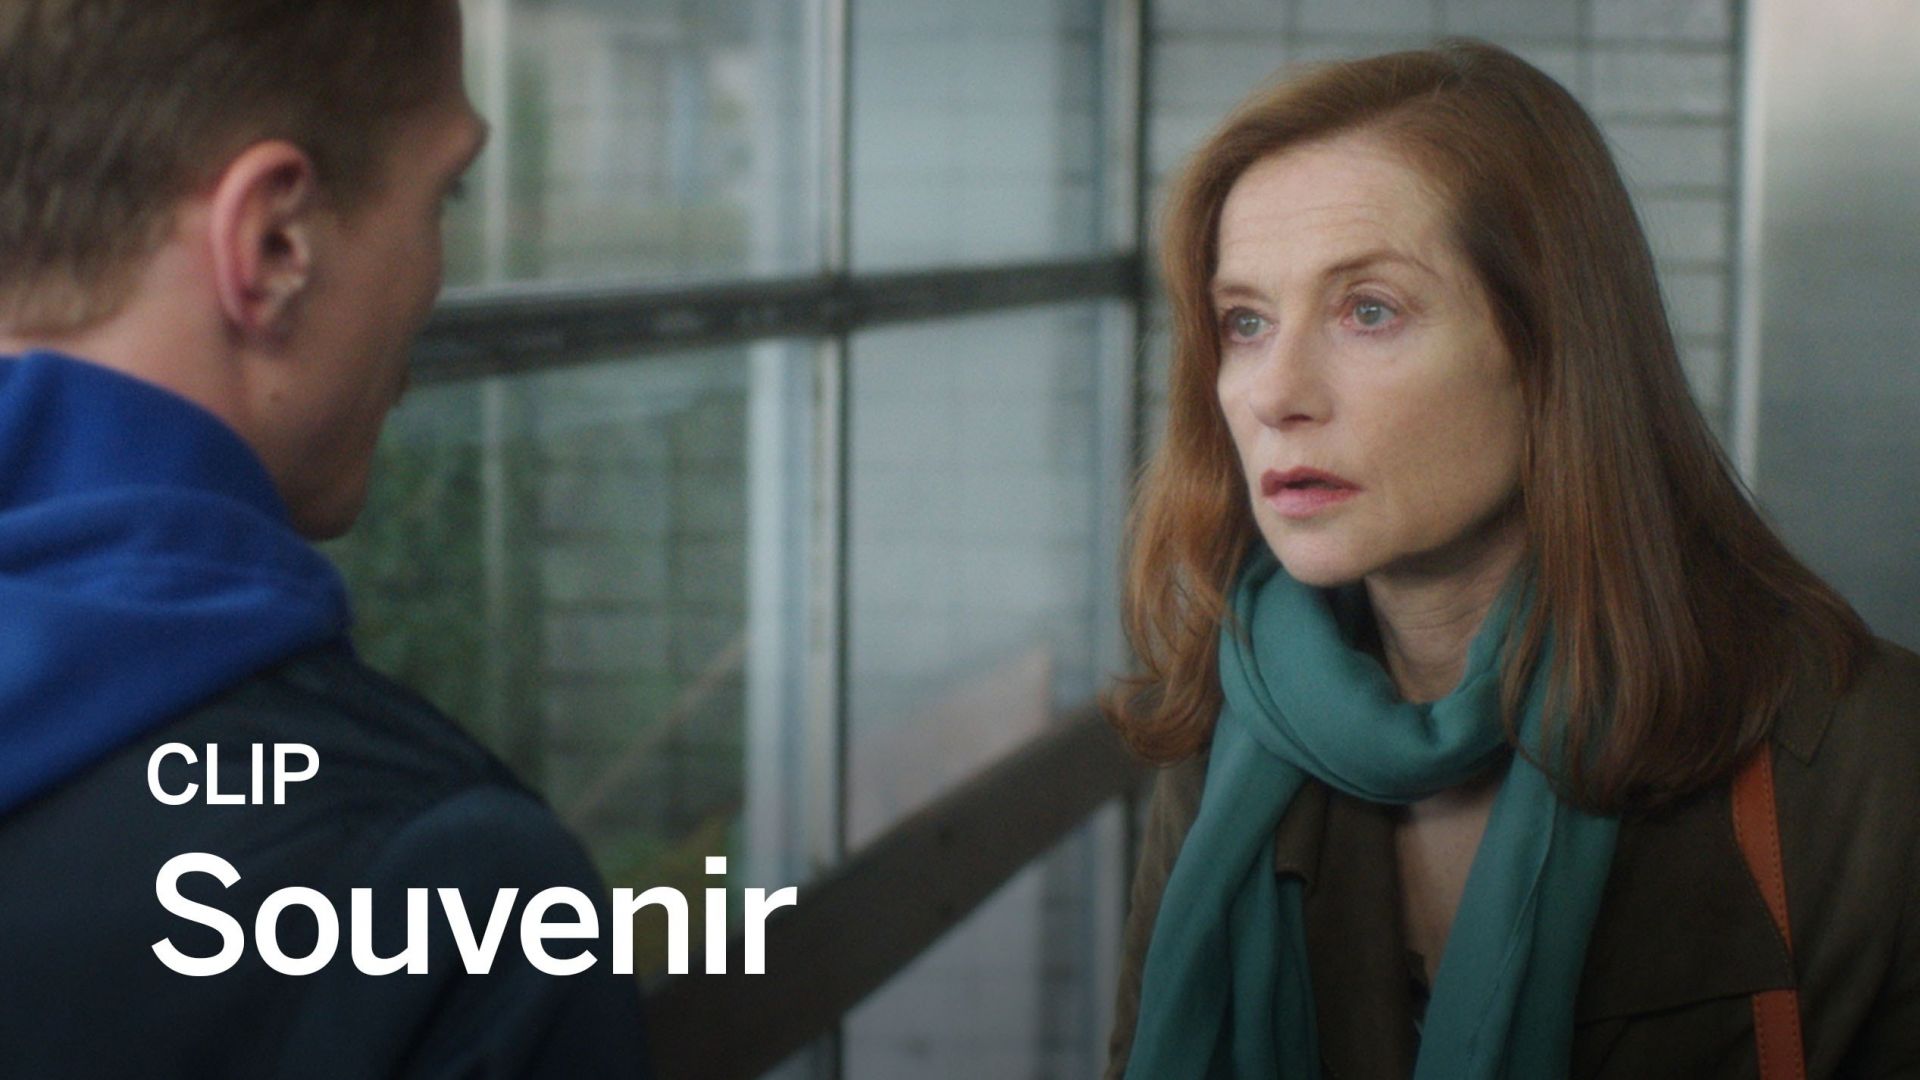 Clip from &#039;Souvenir&#039; with Isabelle Huppert